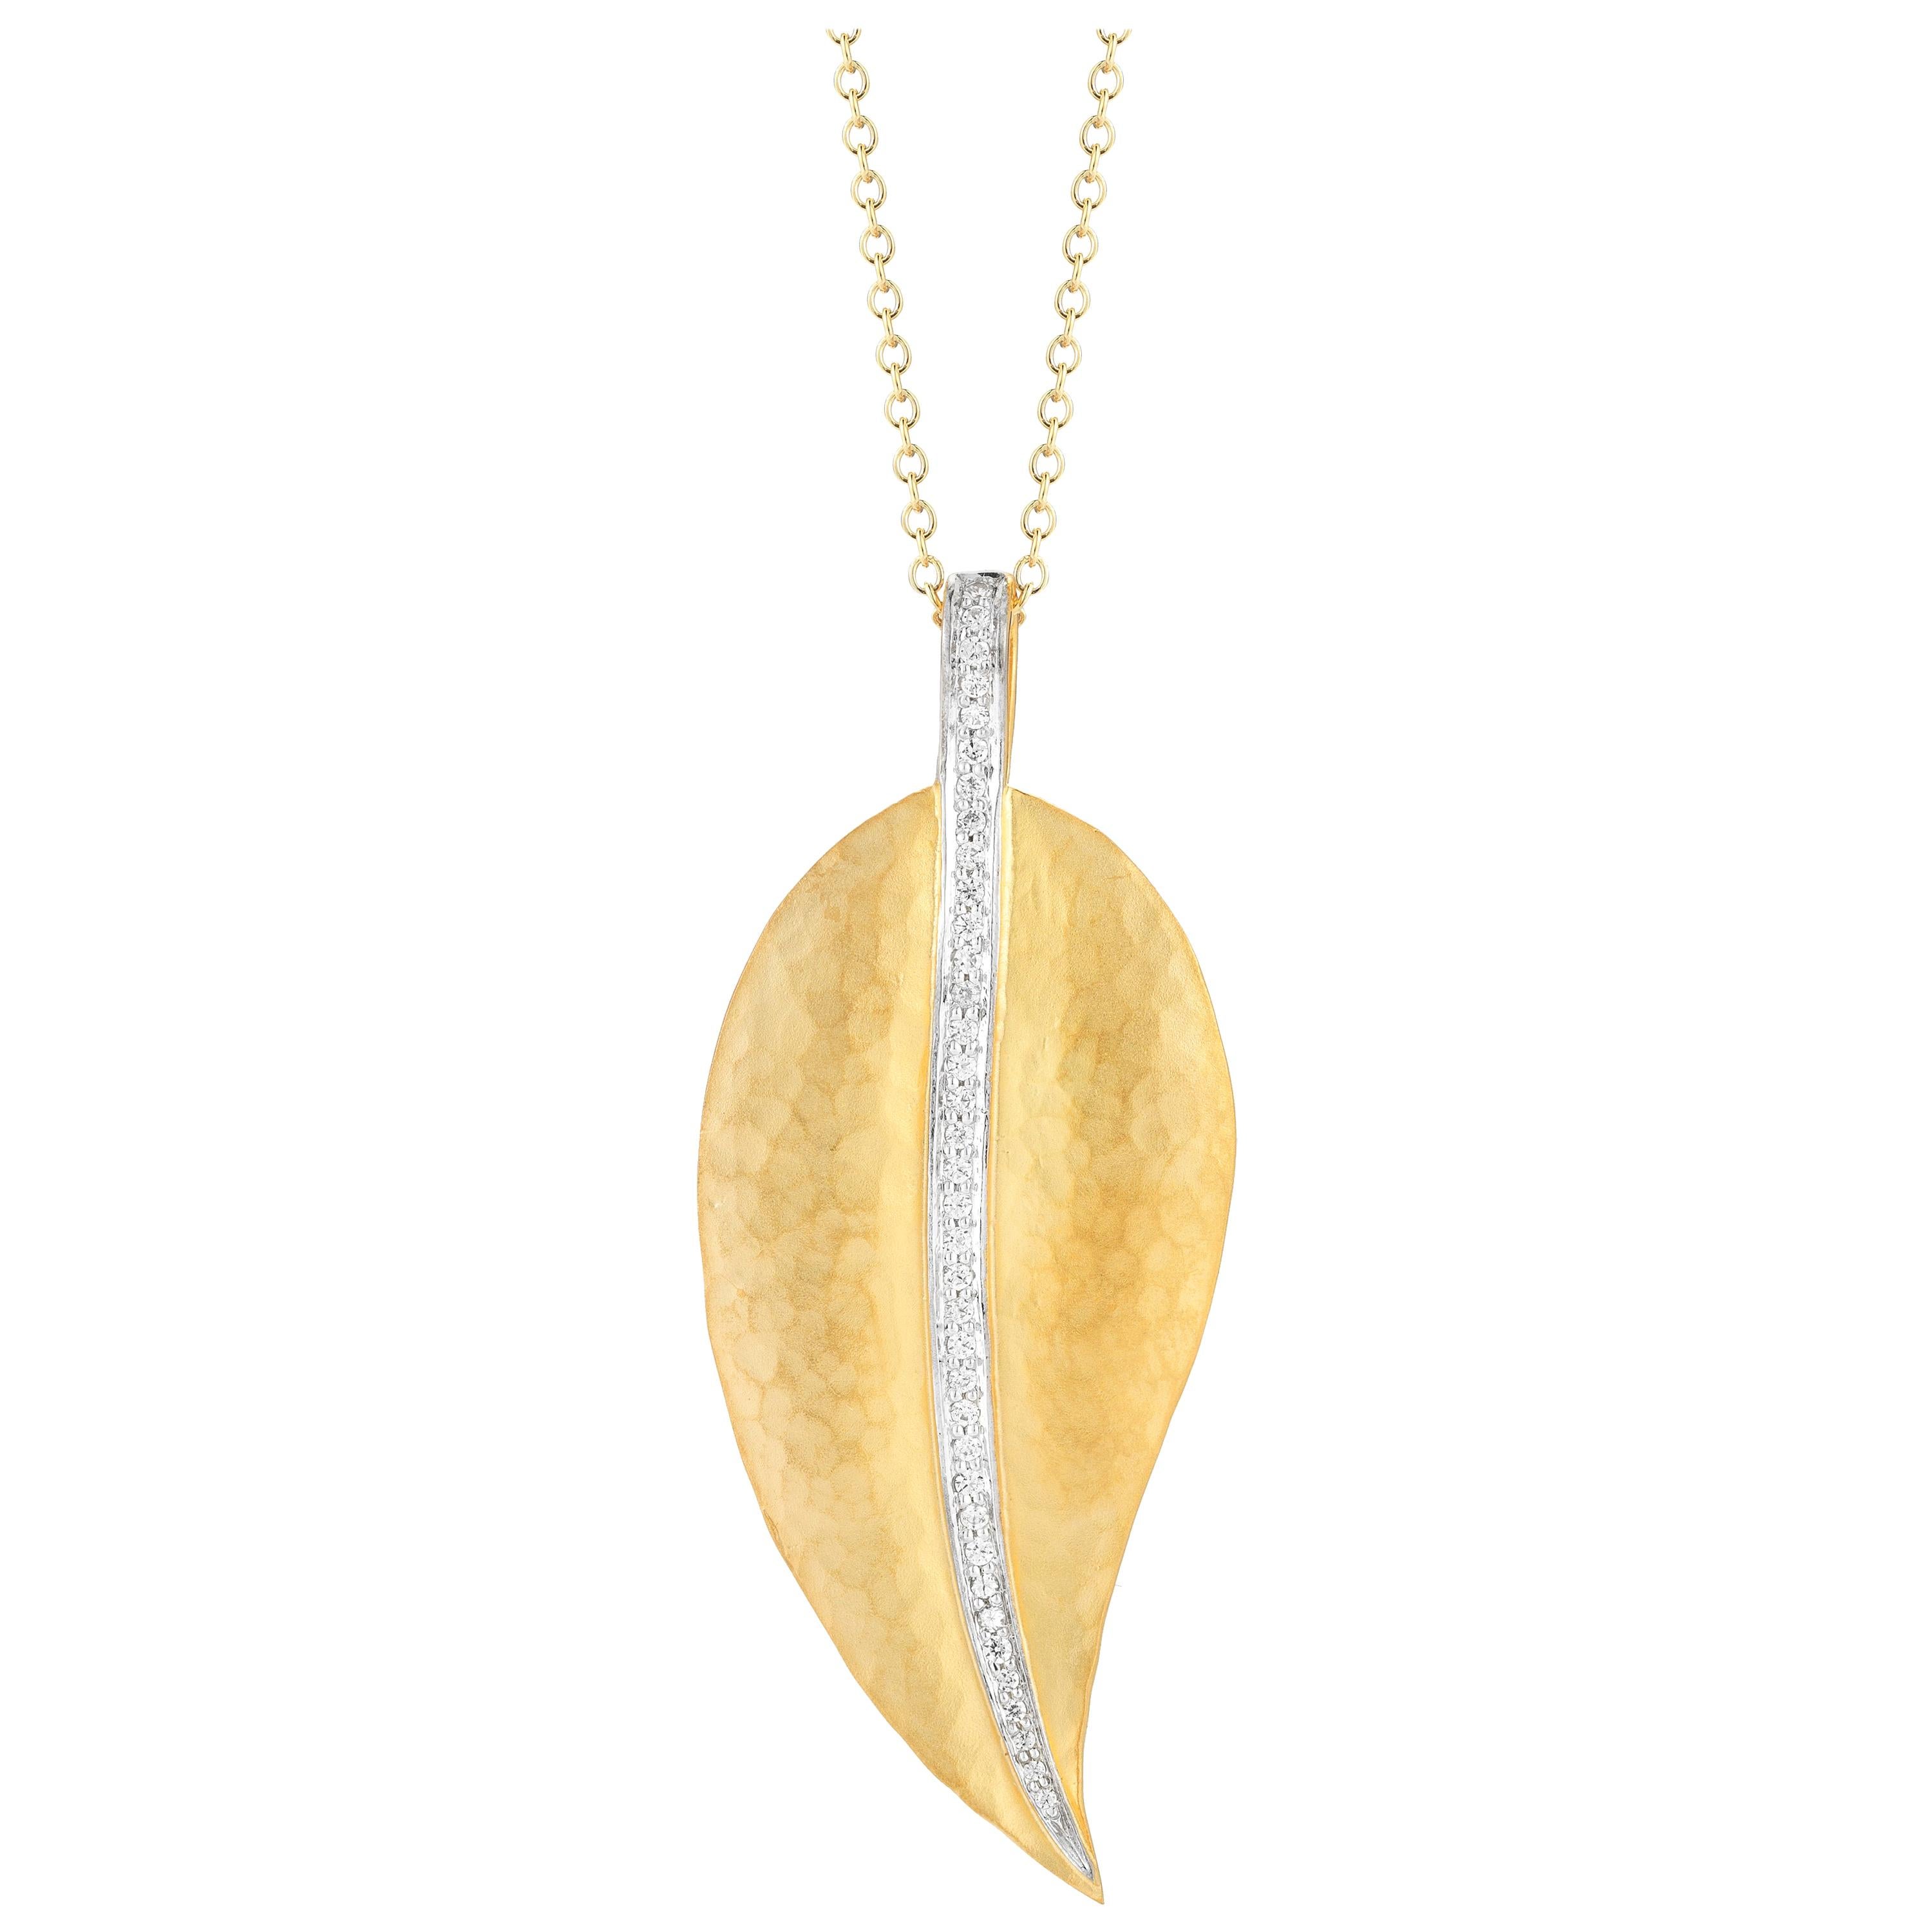 Handcrafted 14 Karat Yellow Gold Hammered Leaf Pendant, Accented with Diamonds For Sale